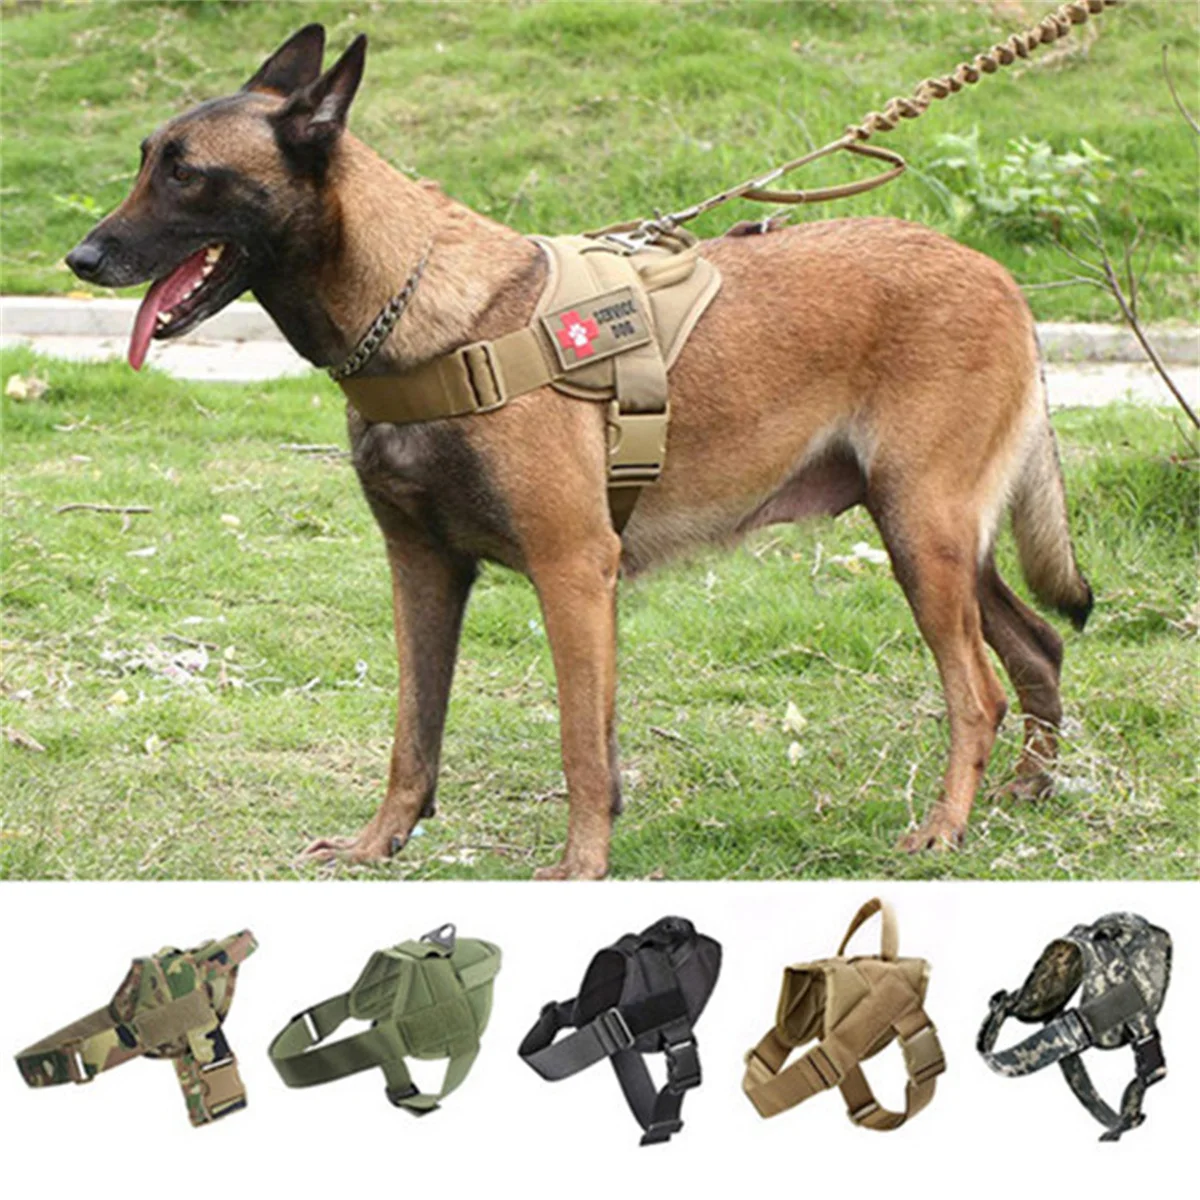 

Dog Harness Vests for Medium Large Pets Chest Strap Adjustable Military Tactical Dogs Harness Labrador Bulldog Training Supplies